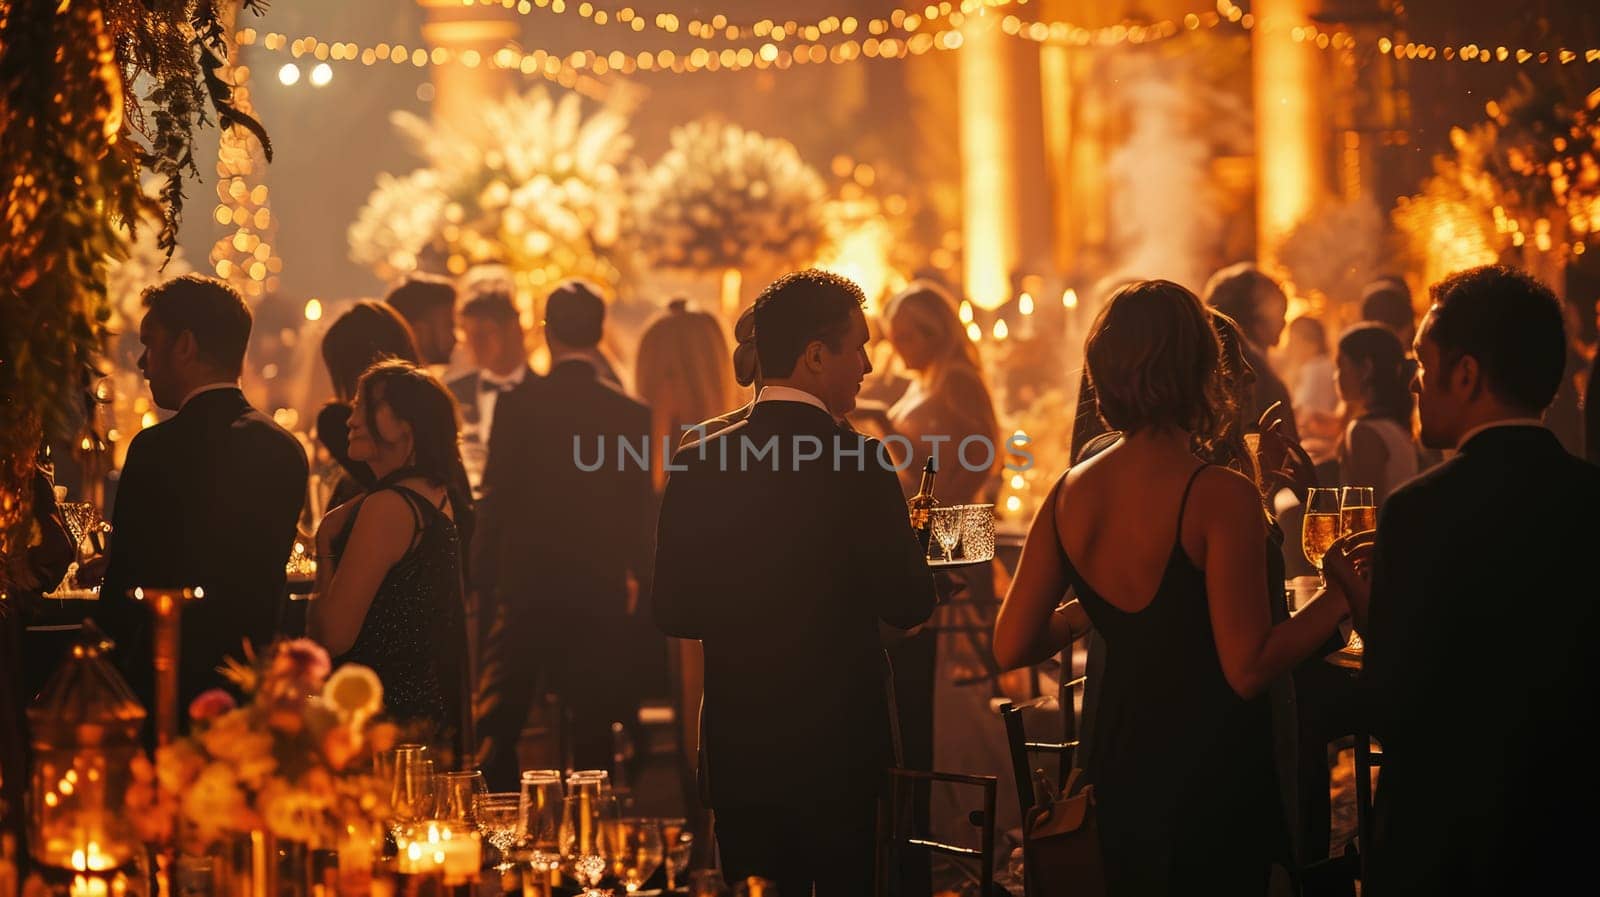 An elegant evening event, people in formal attire, beautifully decorated venue, capturing the essence of a sophisticated gathering. Resplendent.